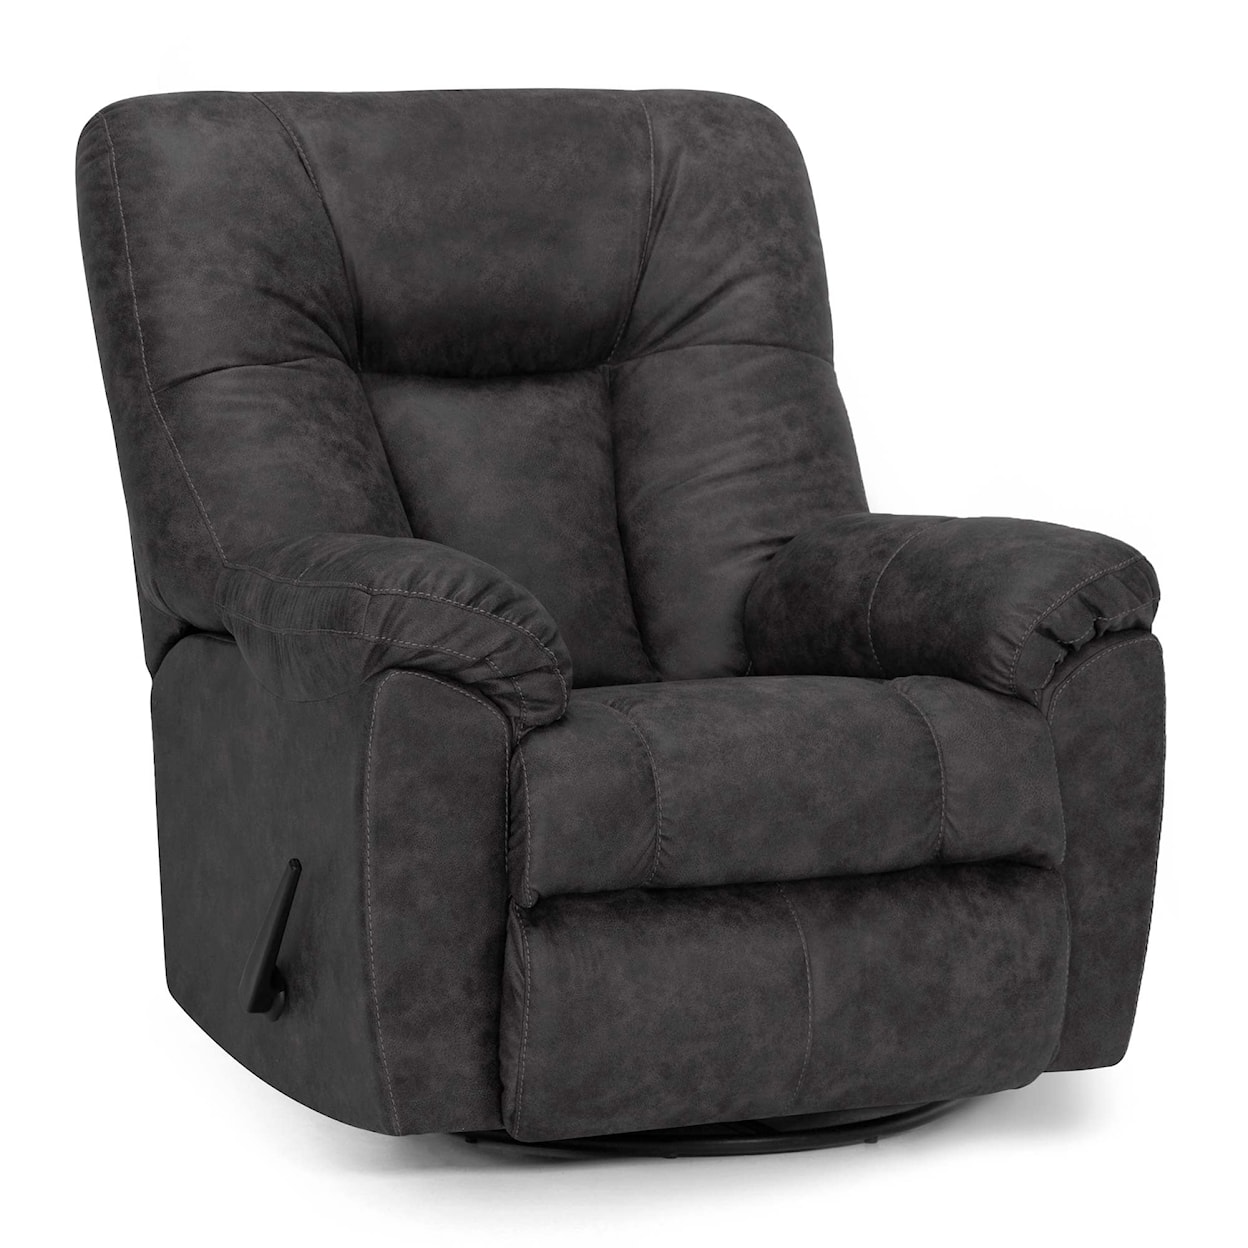 Franklin Recliners CONWAY SWIVEL SLATE RECLINER |